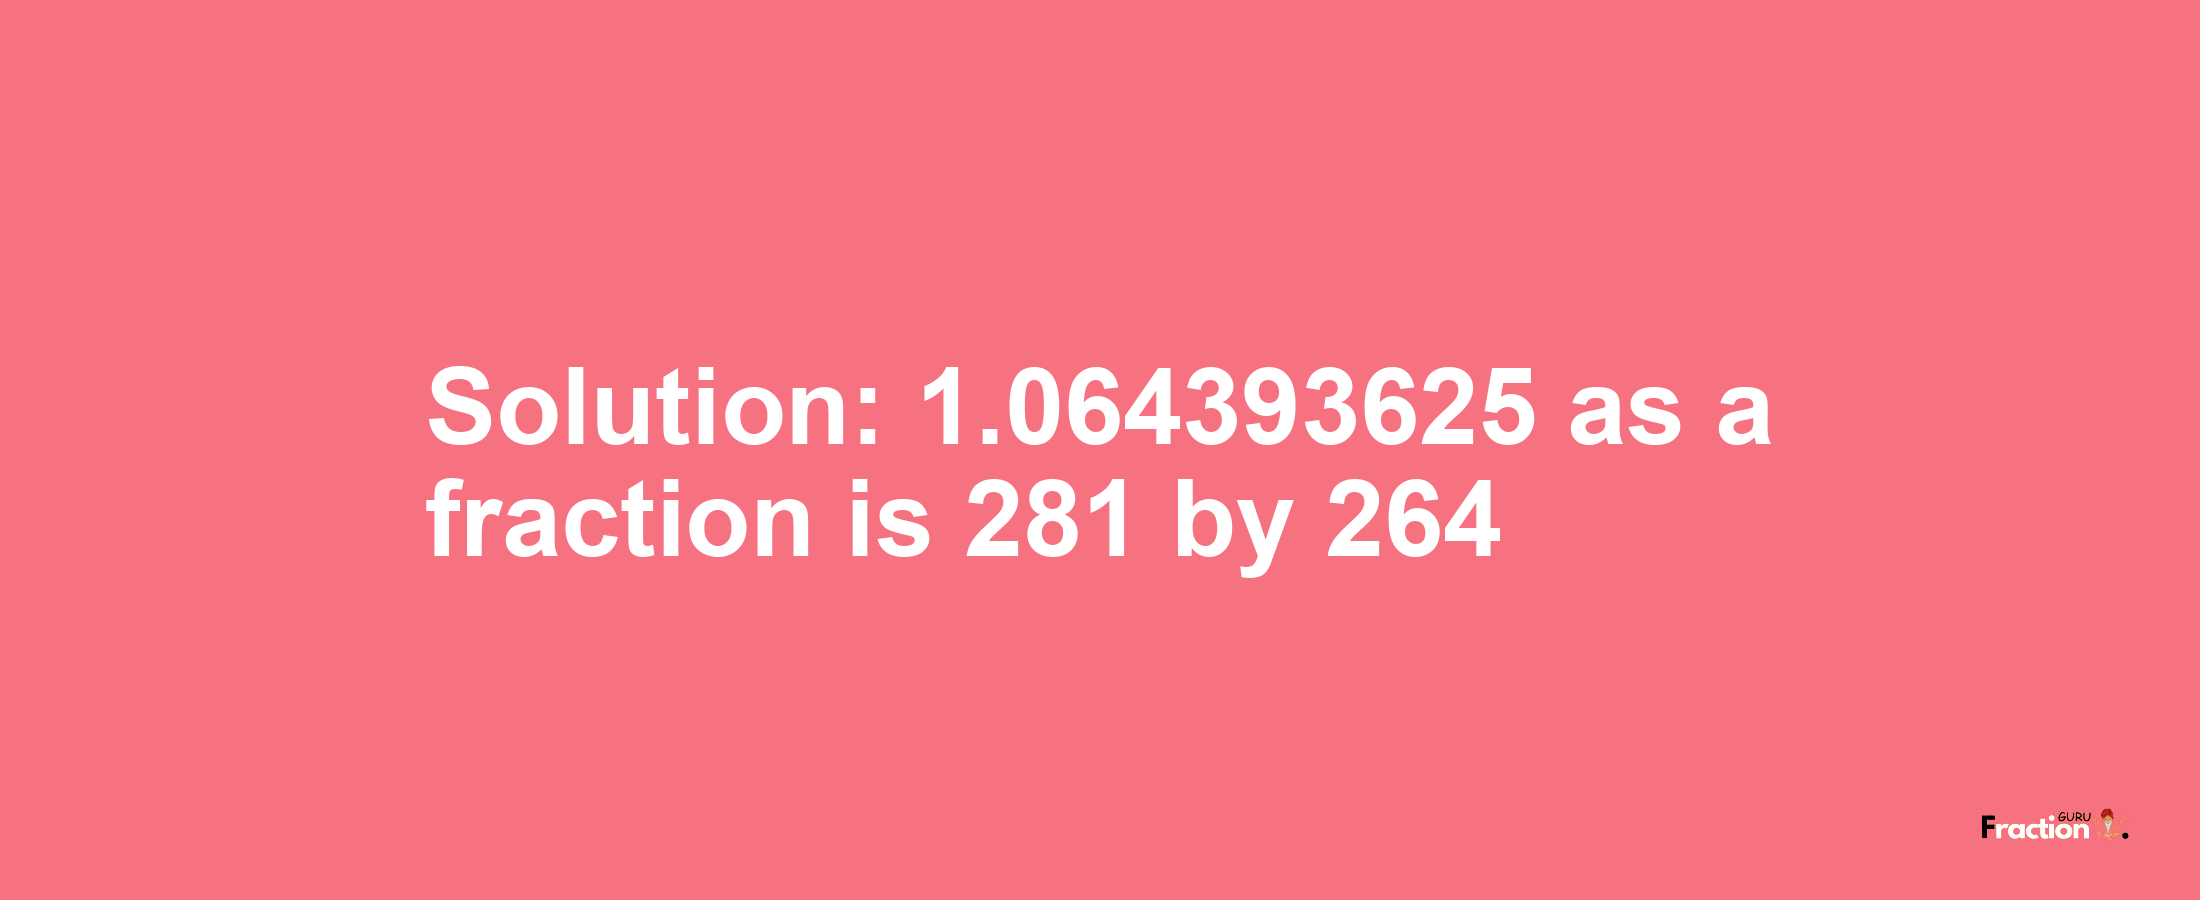 Solution:1.064393625 as a fraction is 281/264